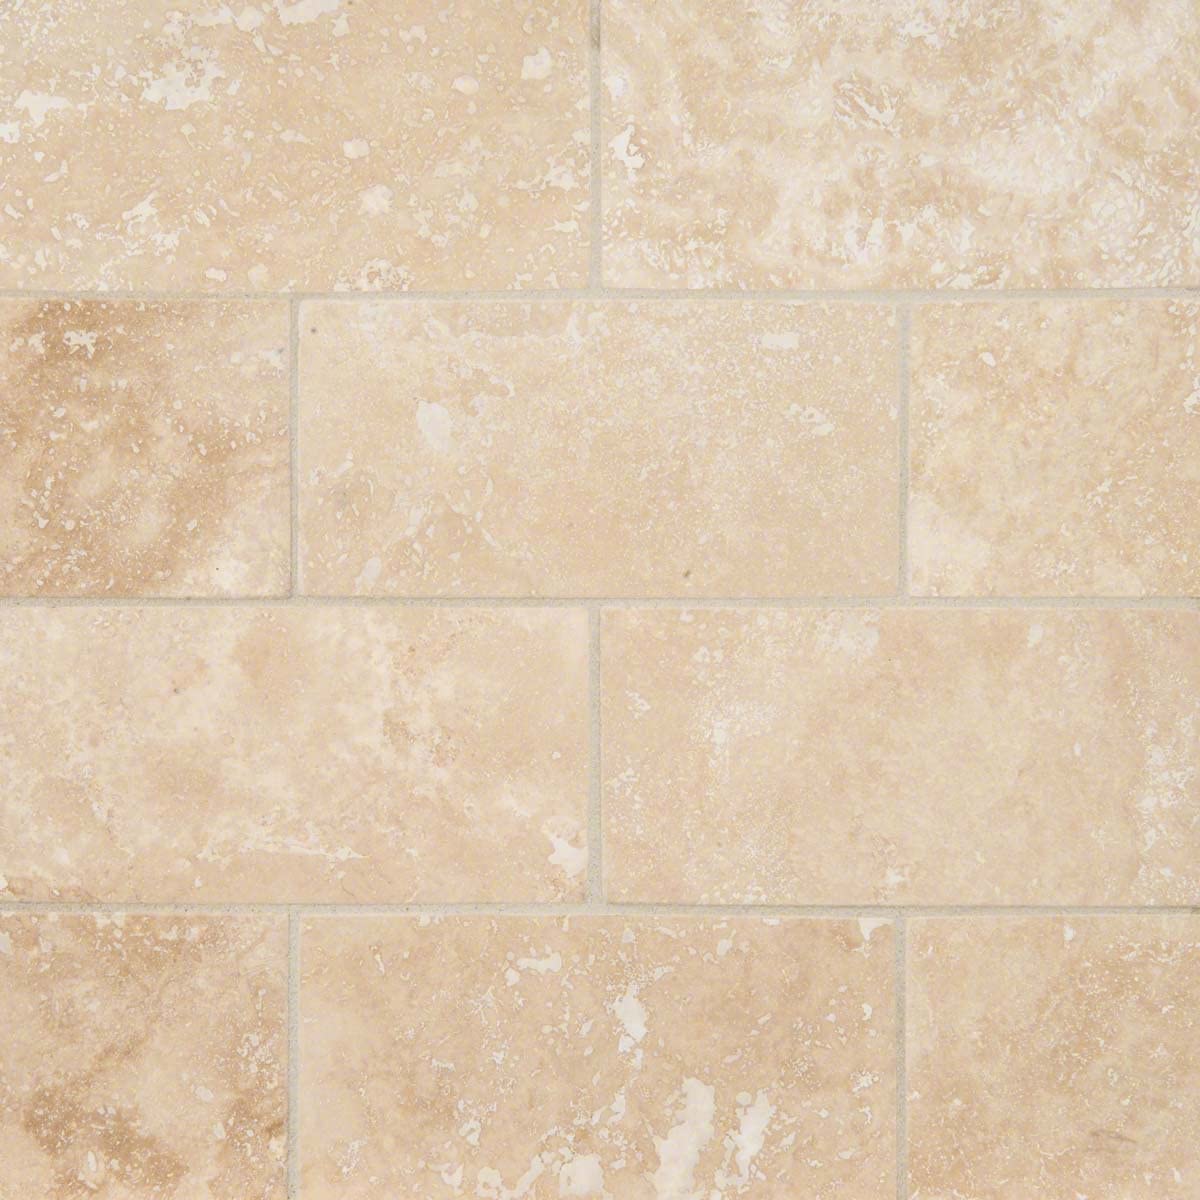 Ivory Travertine Filled & Honed Wall and Floor Tile 3x6"